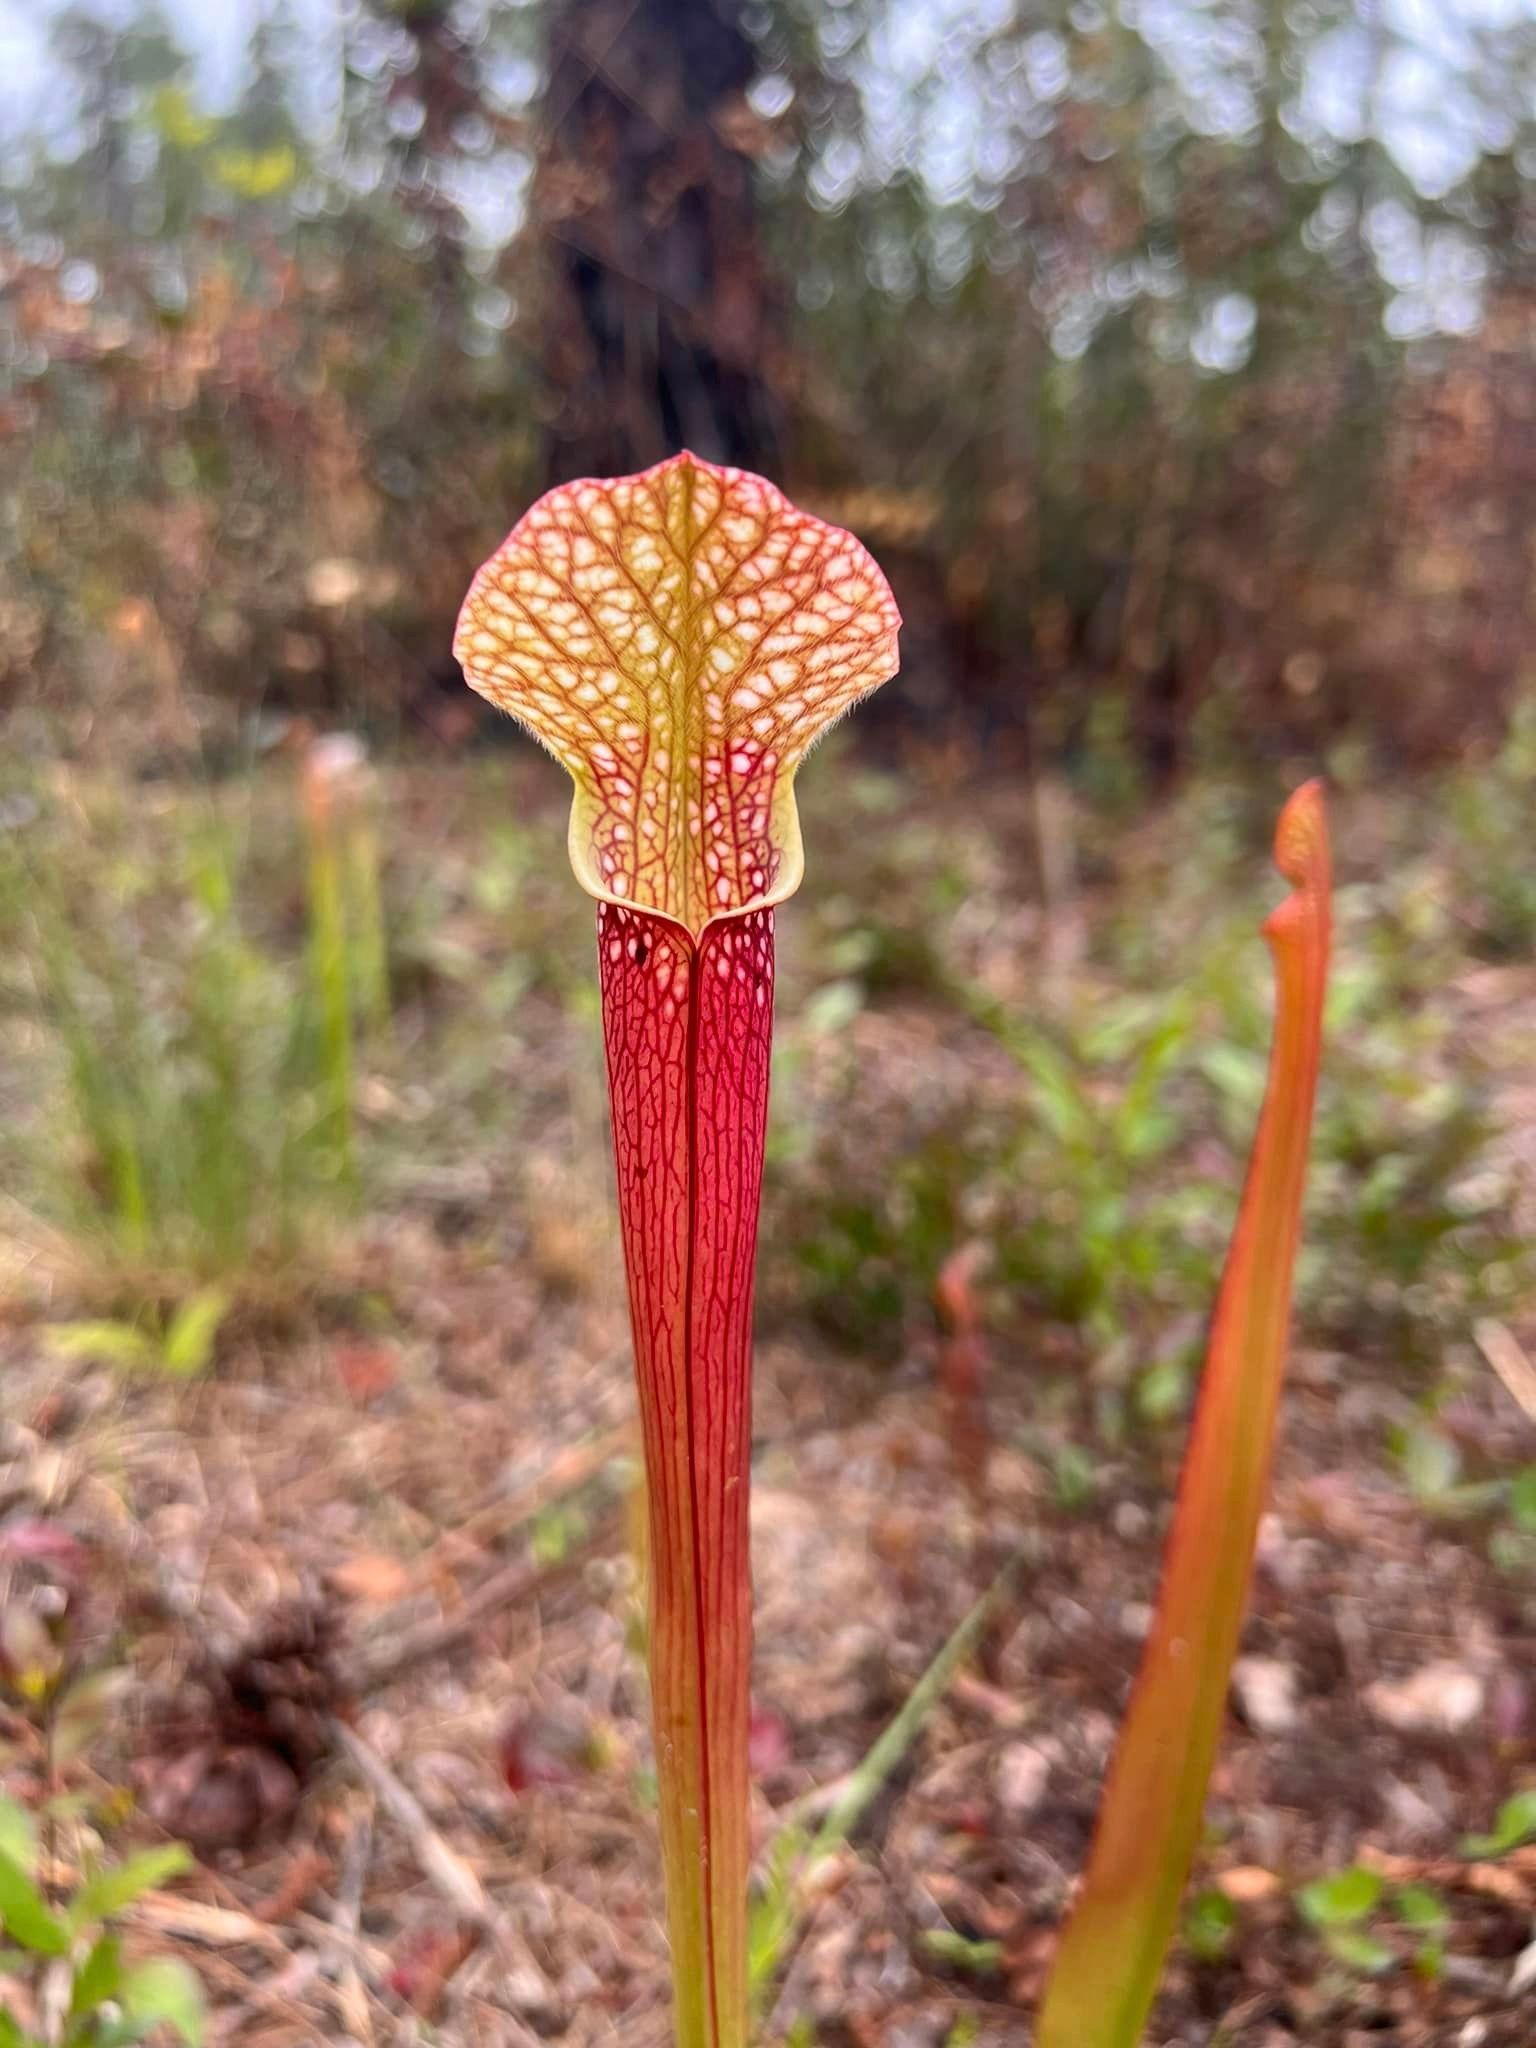 The Enchanting Gulf Coast Pitcher Plant: History, Bloom, and Significance